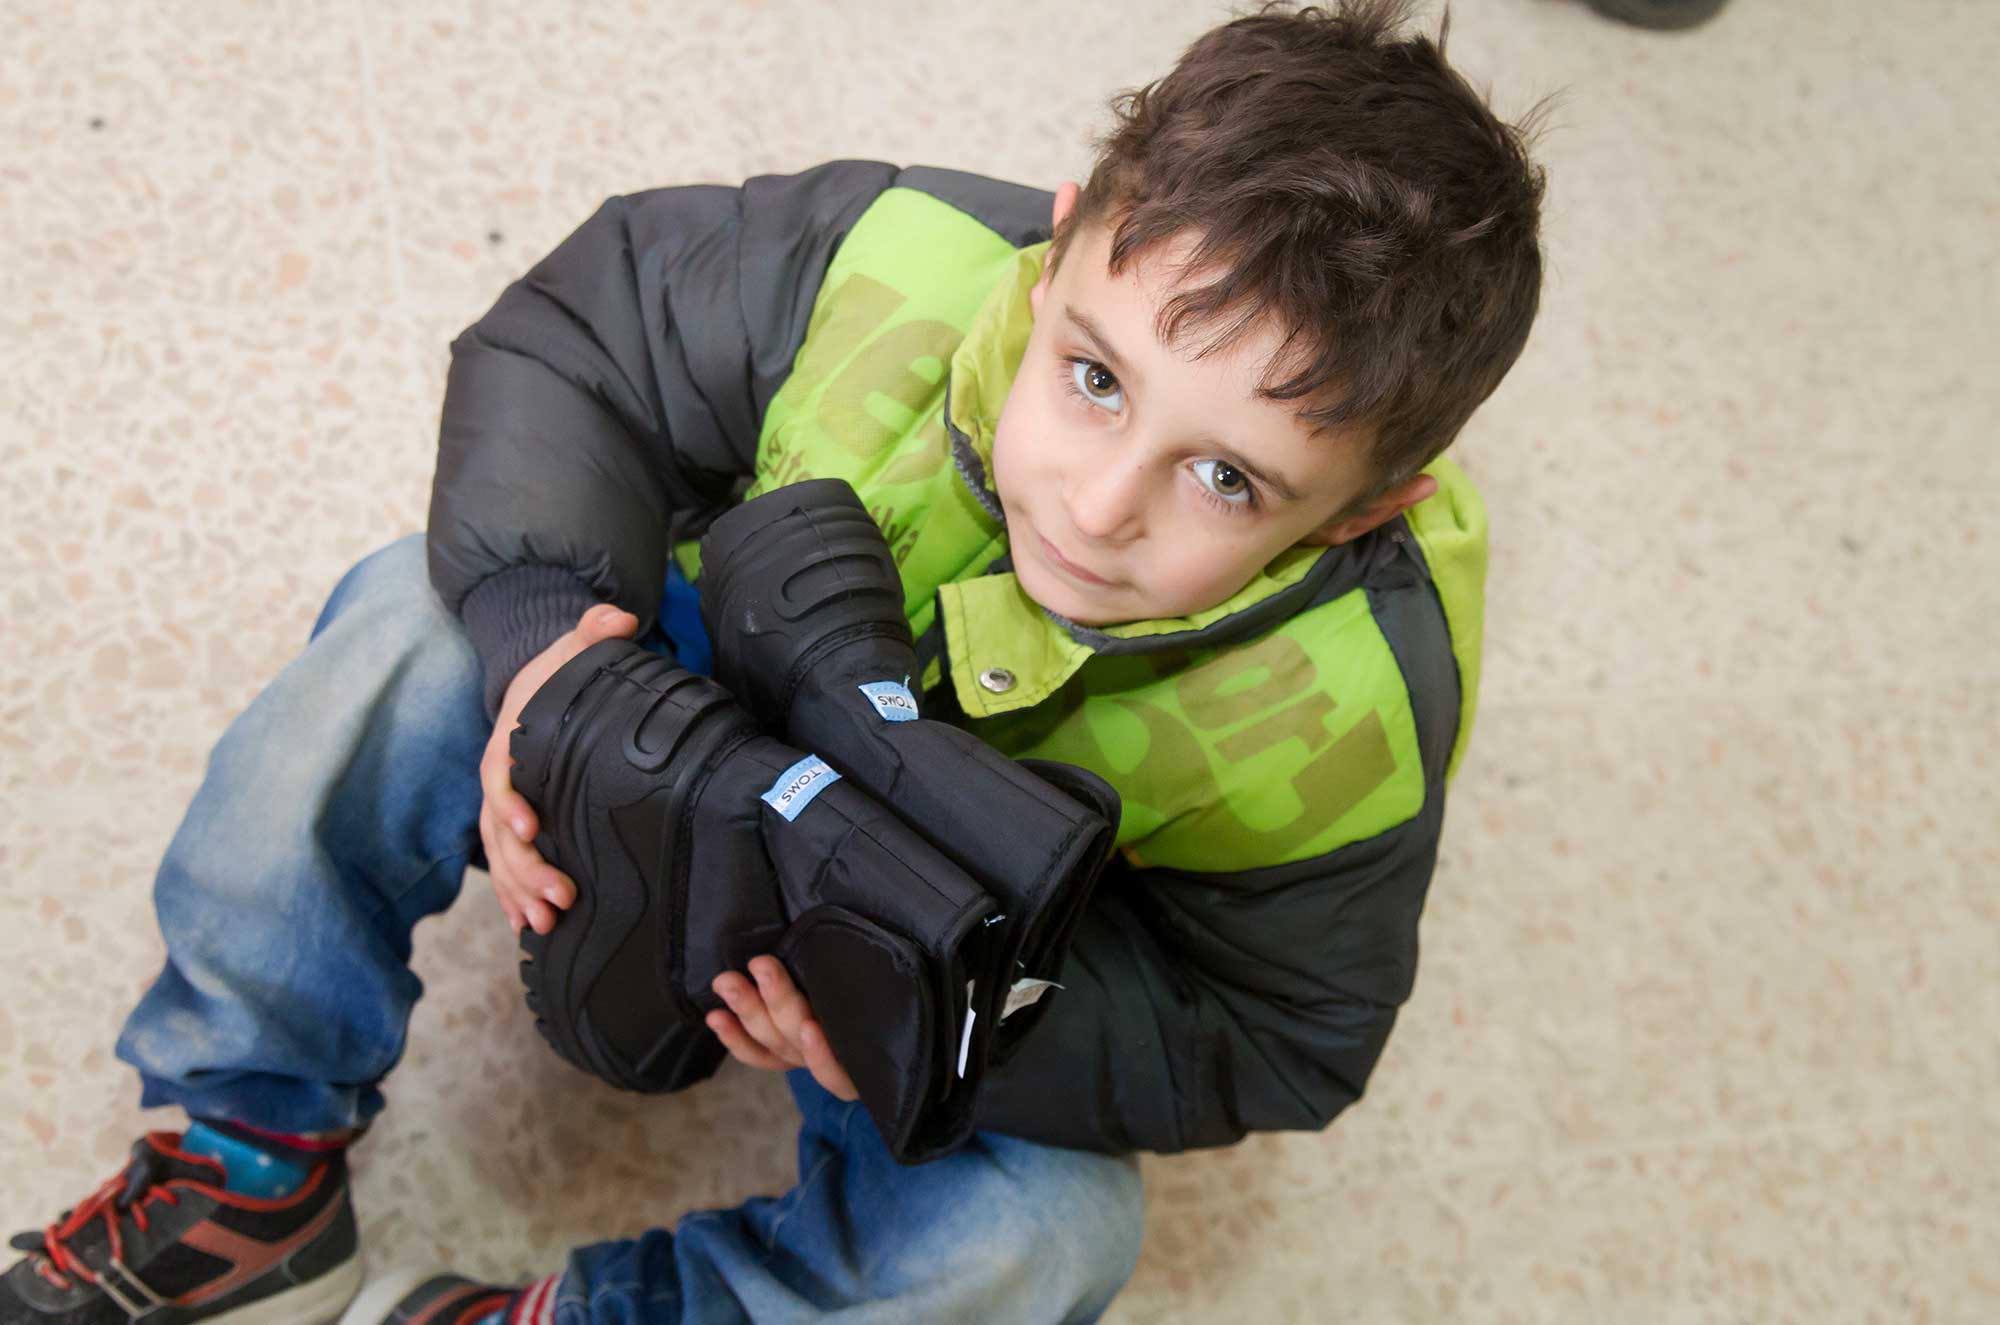 Palestinian and Syrian refugee children at Wavel camp preschool received new winter boots from TOMS.